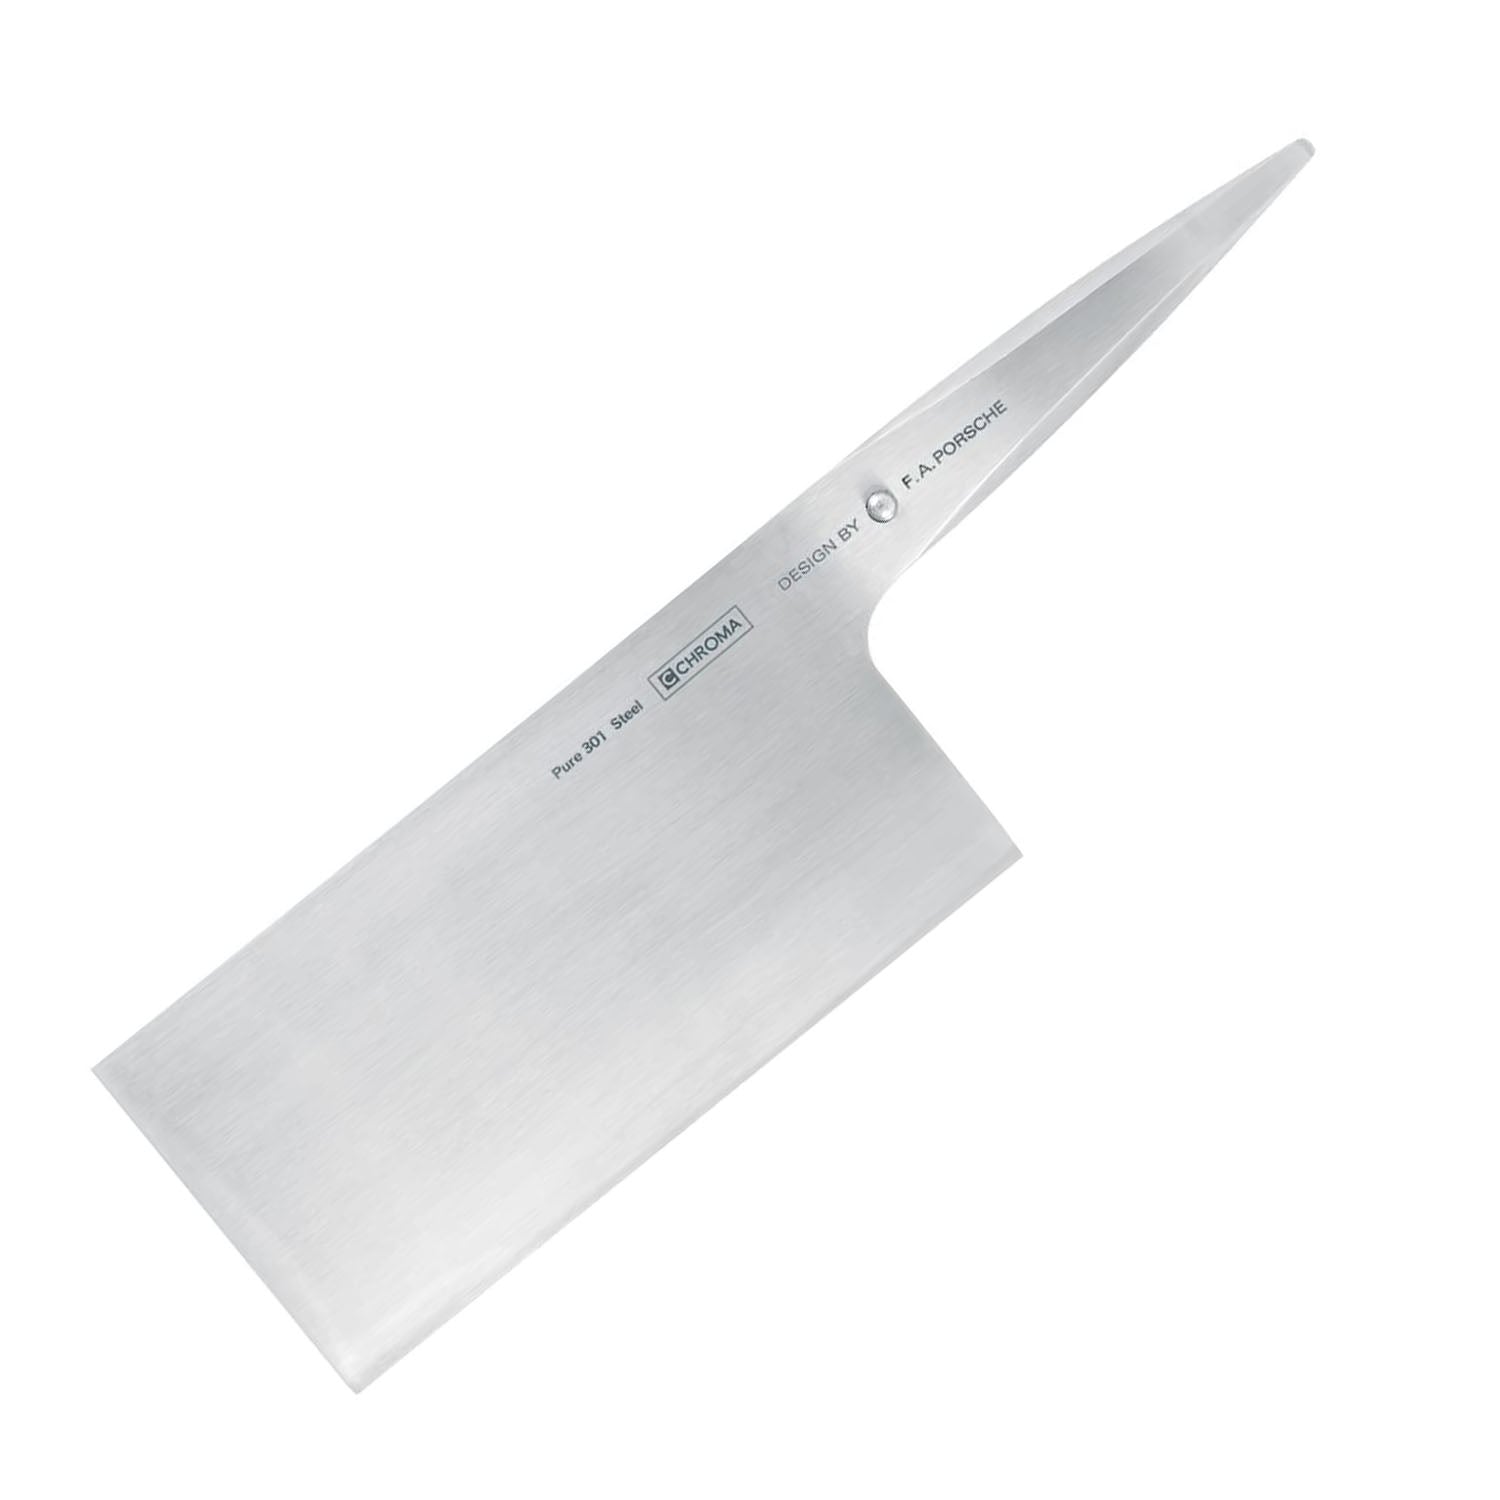 Chroma Type 301 Chinese Vegetable Cleaver, one size, silver